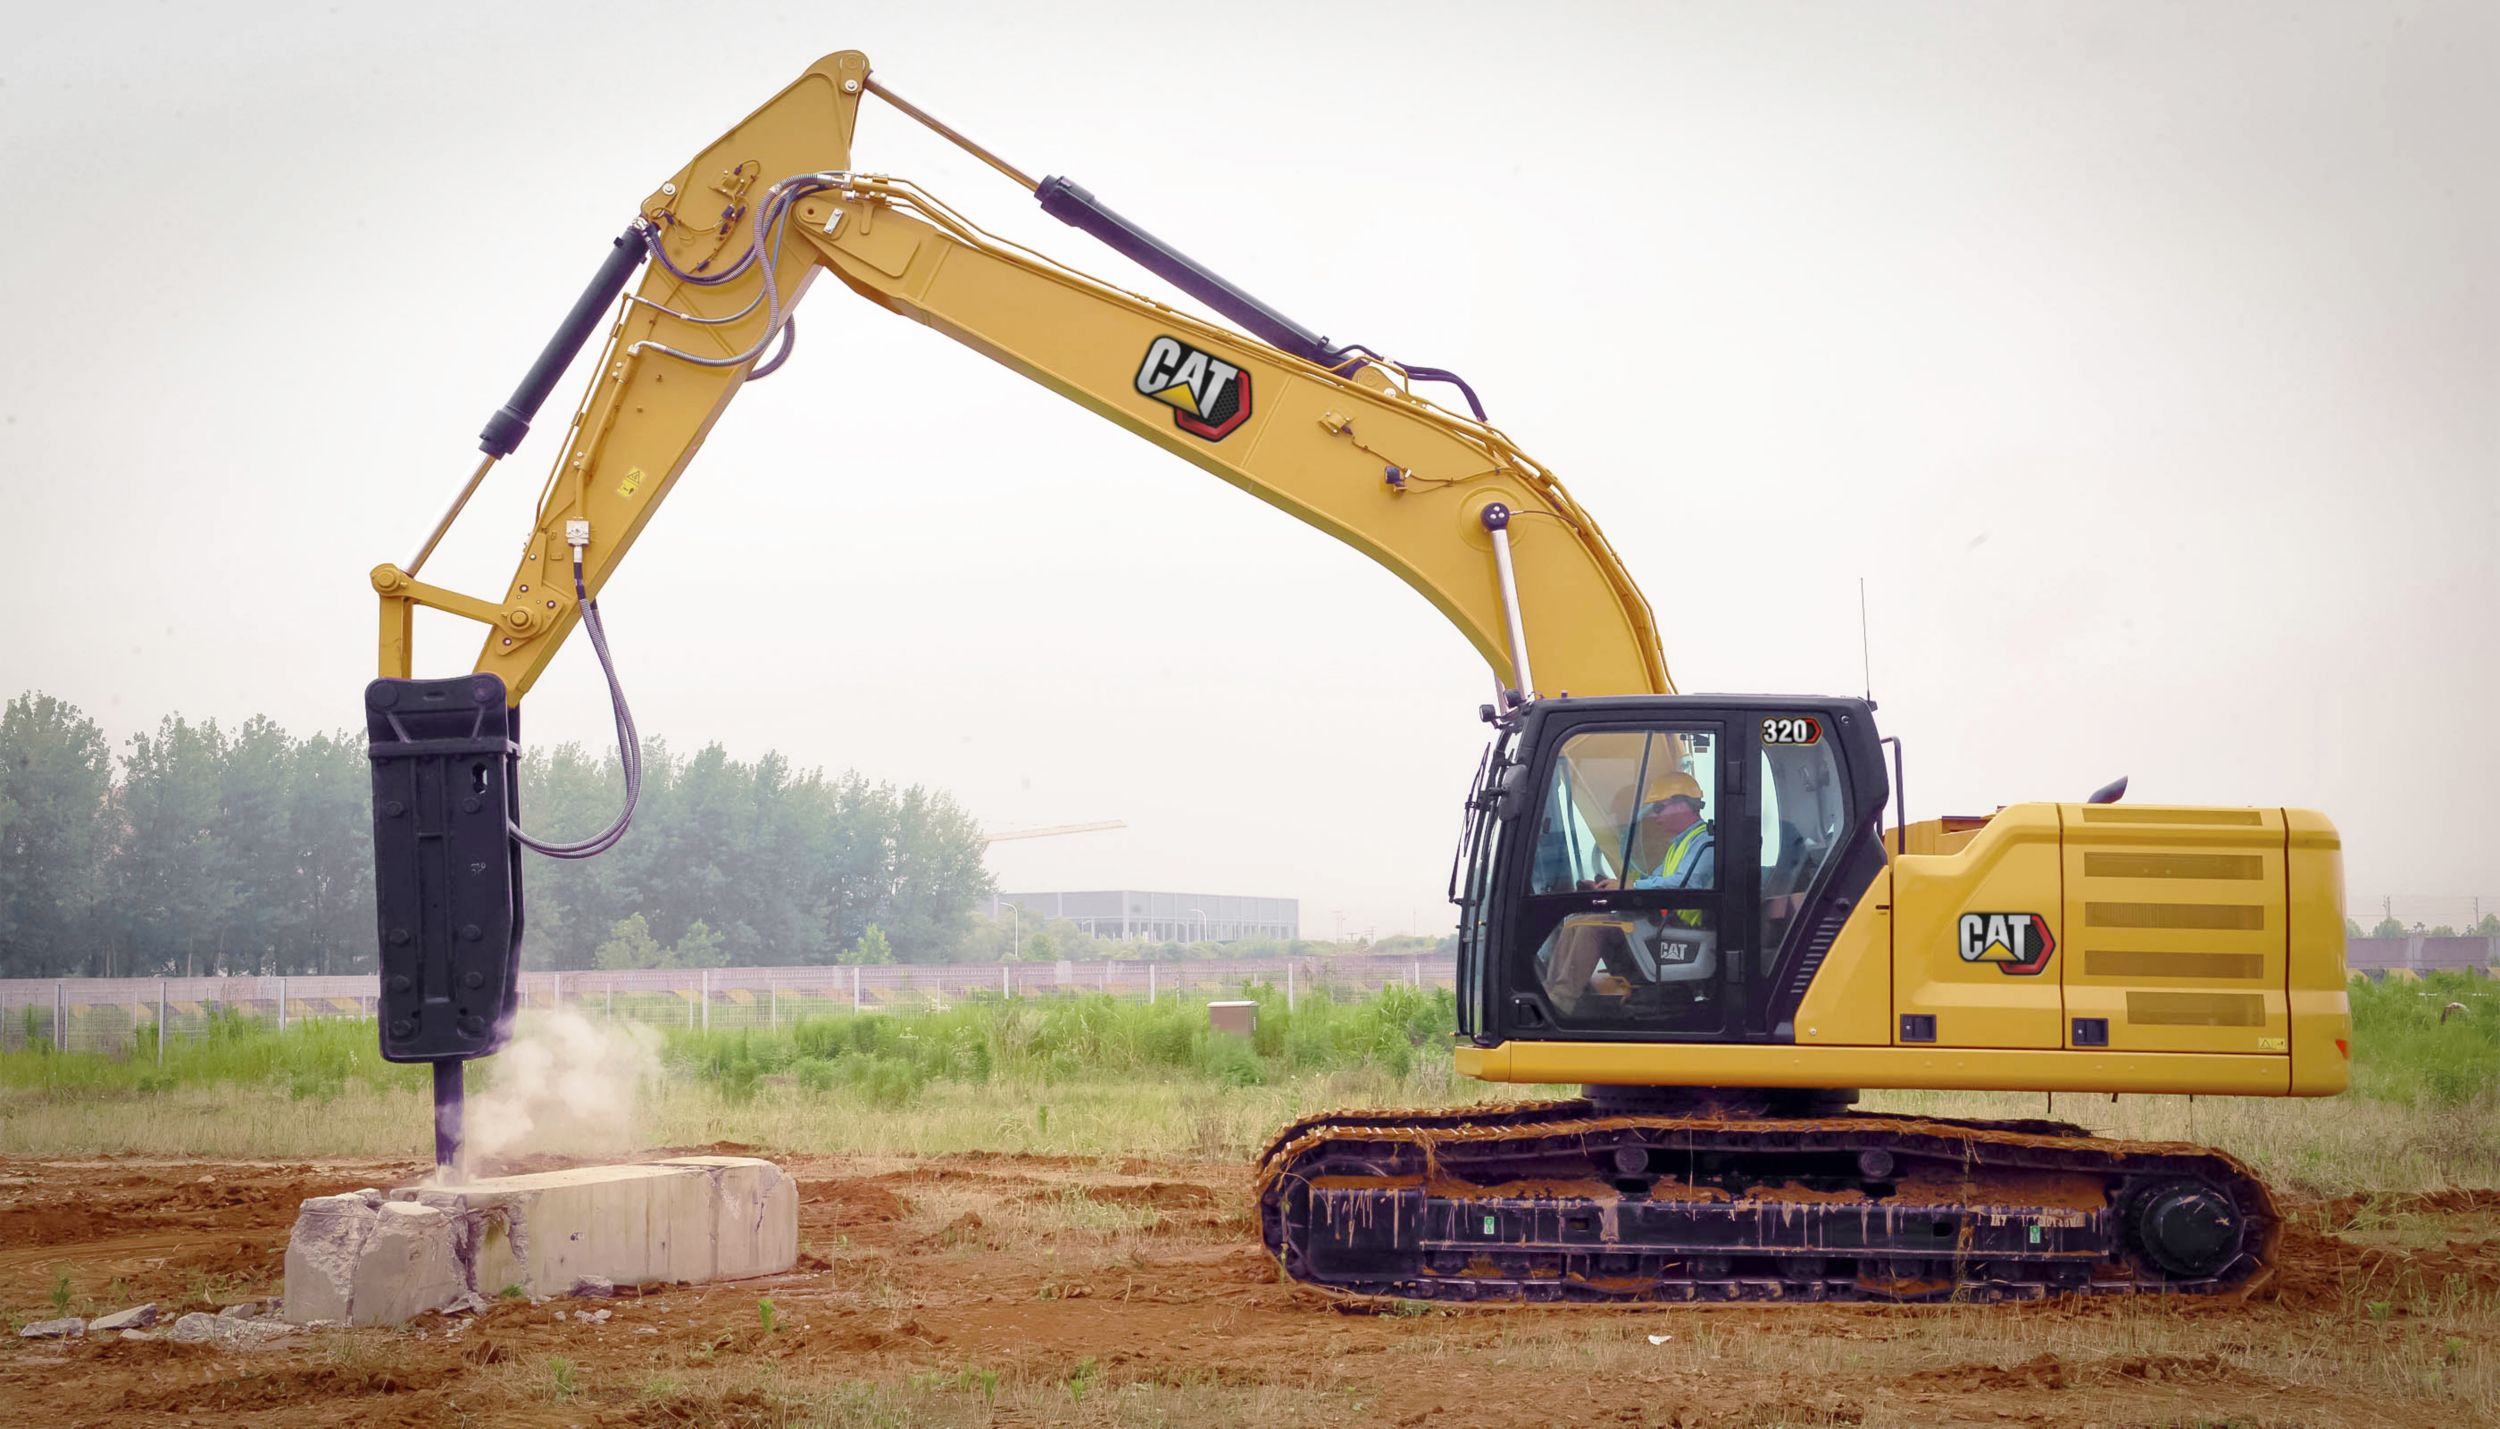 Cat 320 Hydraulic Excavator - RELIABILITY YOU CAN COUNT ON